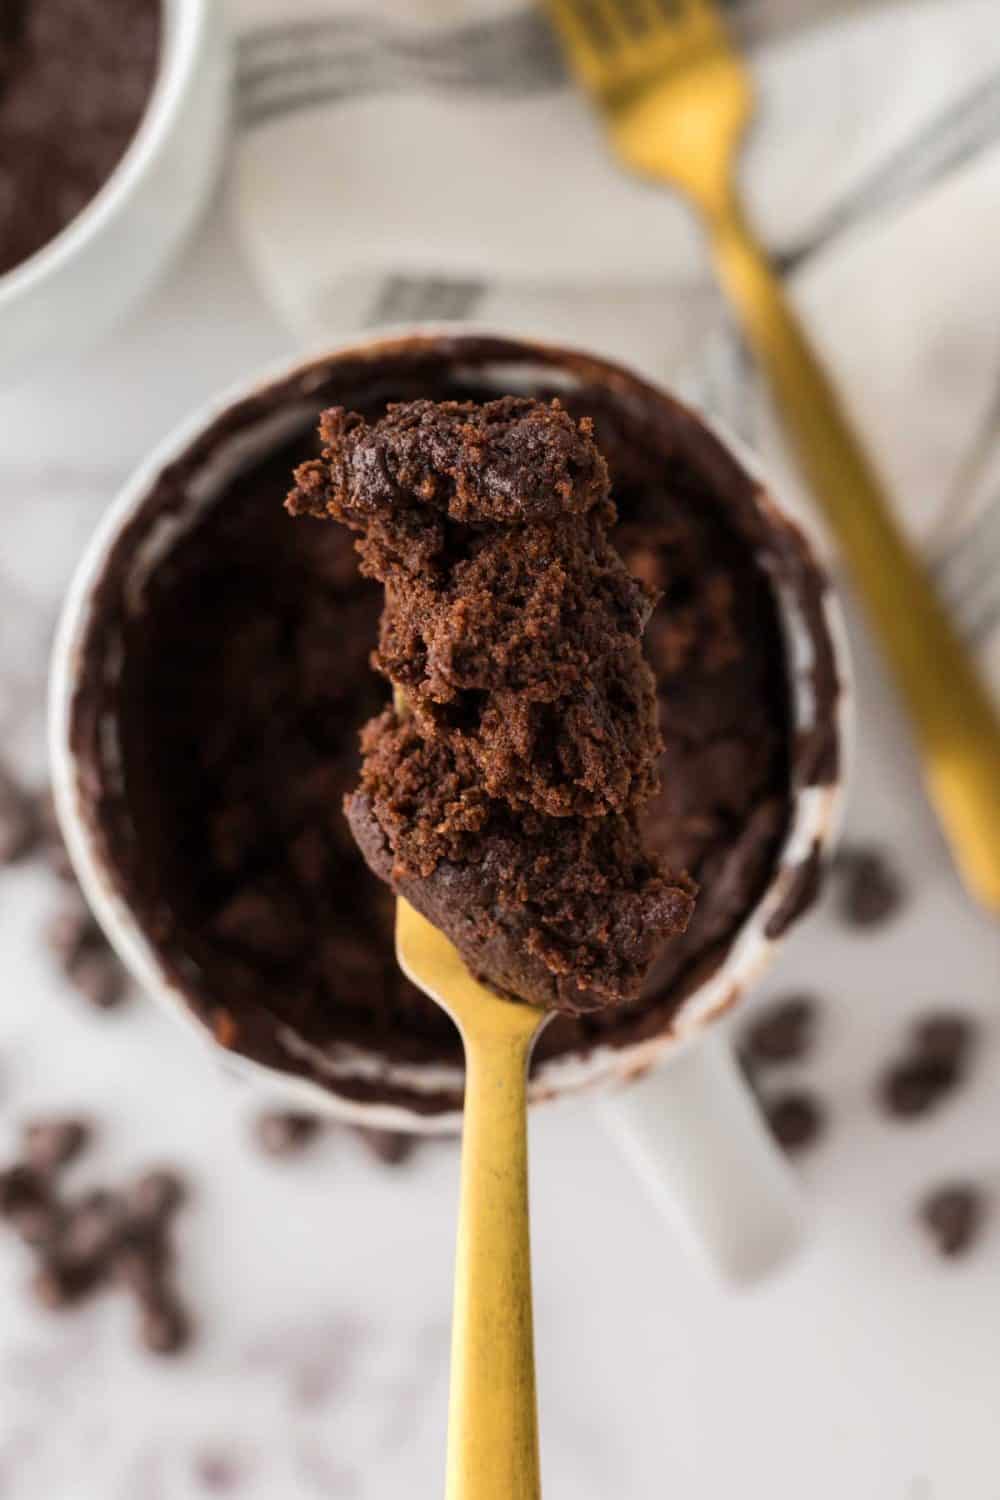 brown chocolate cake baked into a white coffee mug with chocolate chips around and a golden fork.